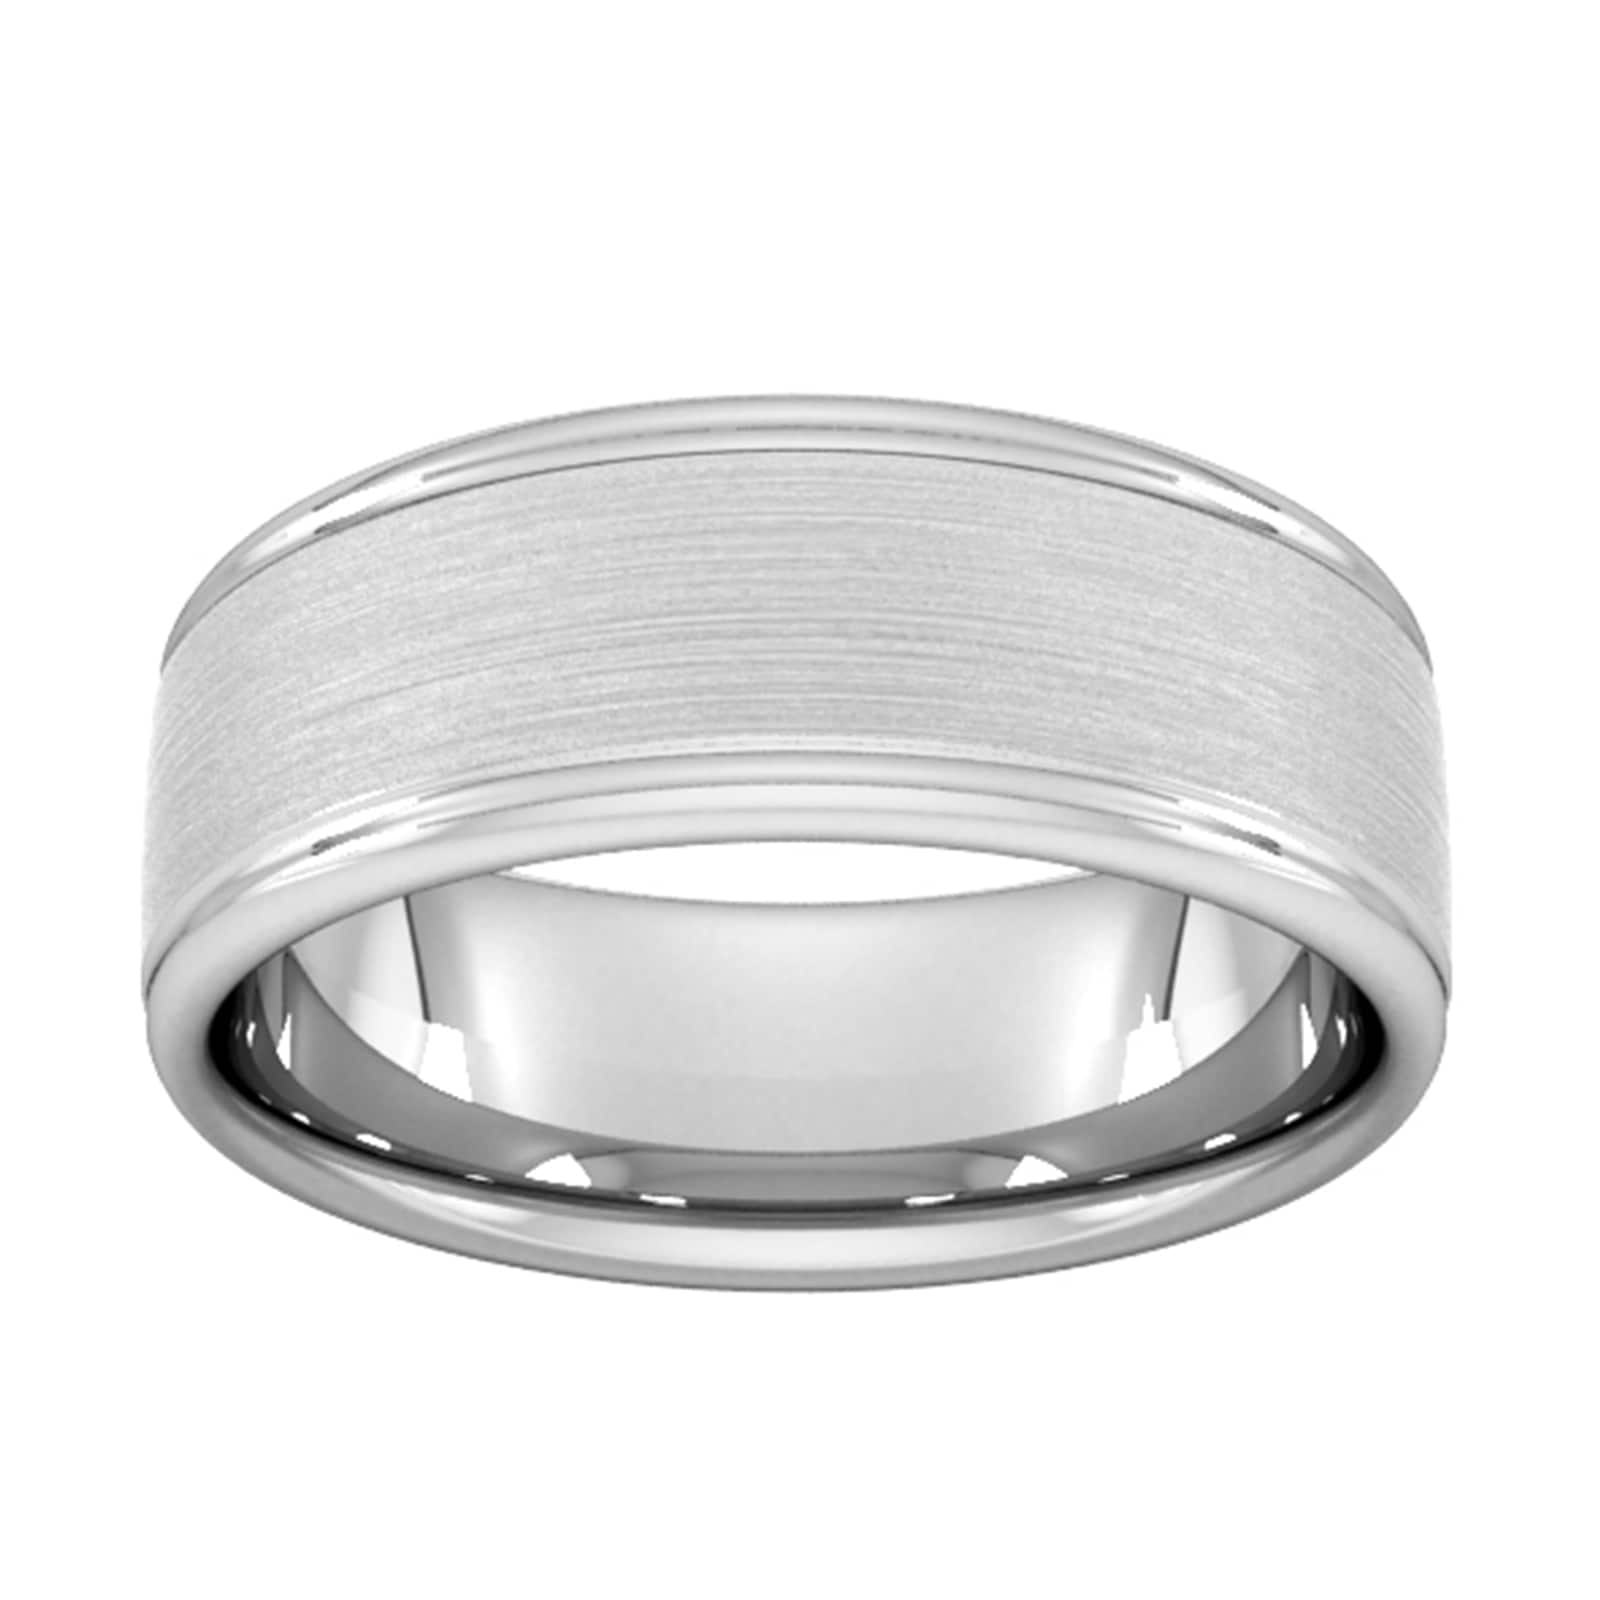 8mm Traditional Court Standard Matt Centre With Grooves Wedding Ring In 18 Carat White Gold - Ring Size V